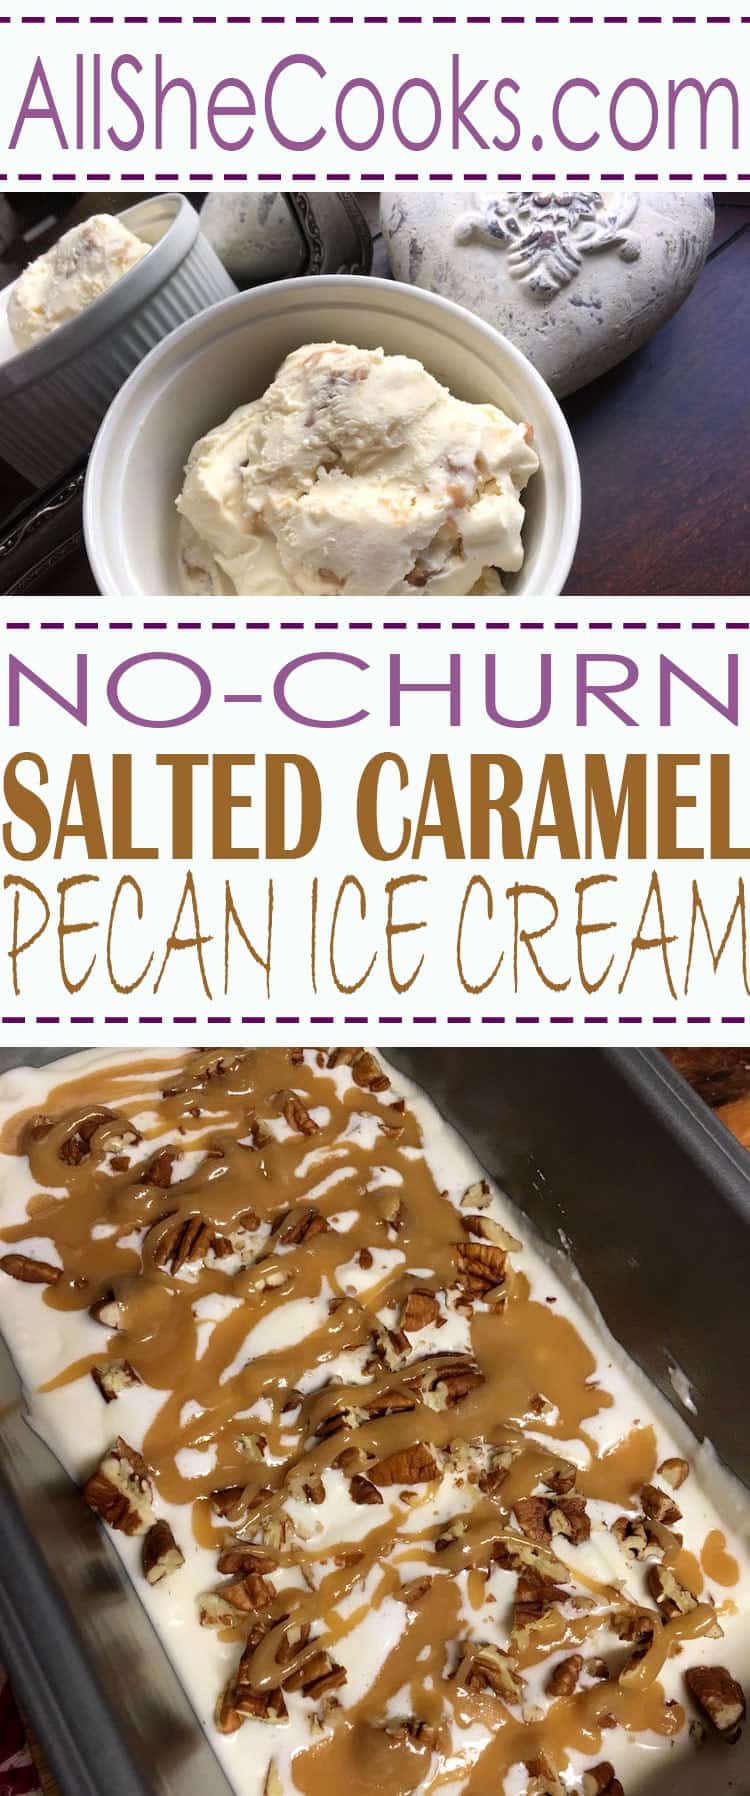 Want to learn how to make No-Churn Salted Caramel Pecan ice cream at home? This ice cream is easy to make without an ice cream maker and can be enjoyed the same day. You will love this ice cream.